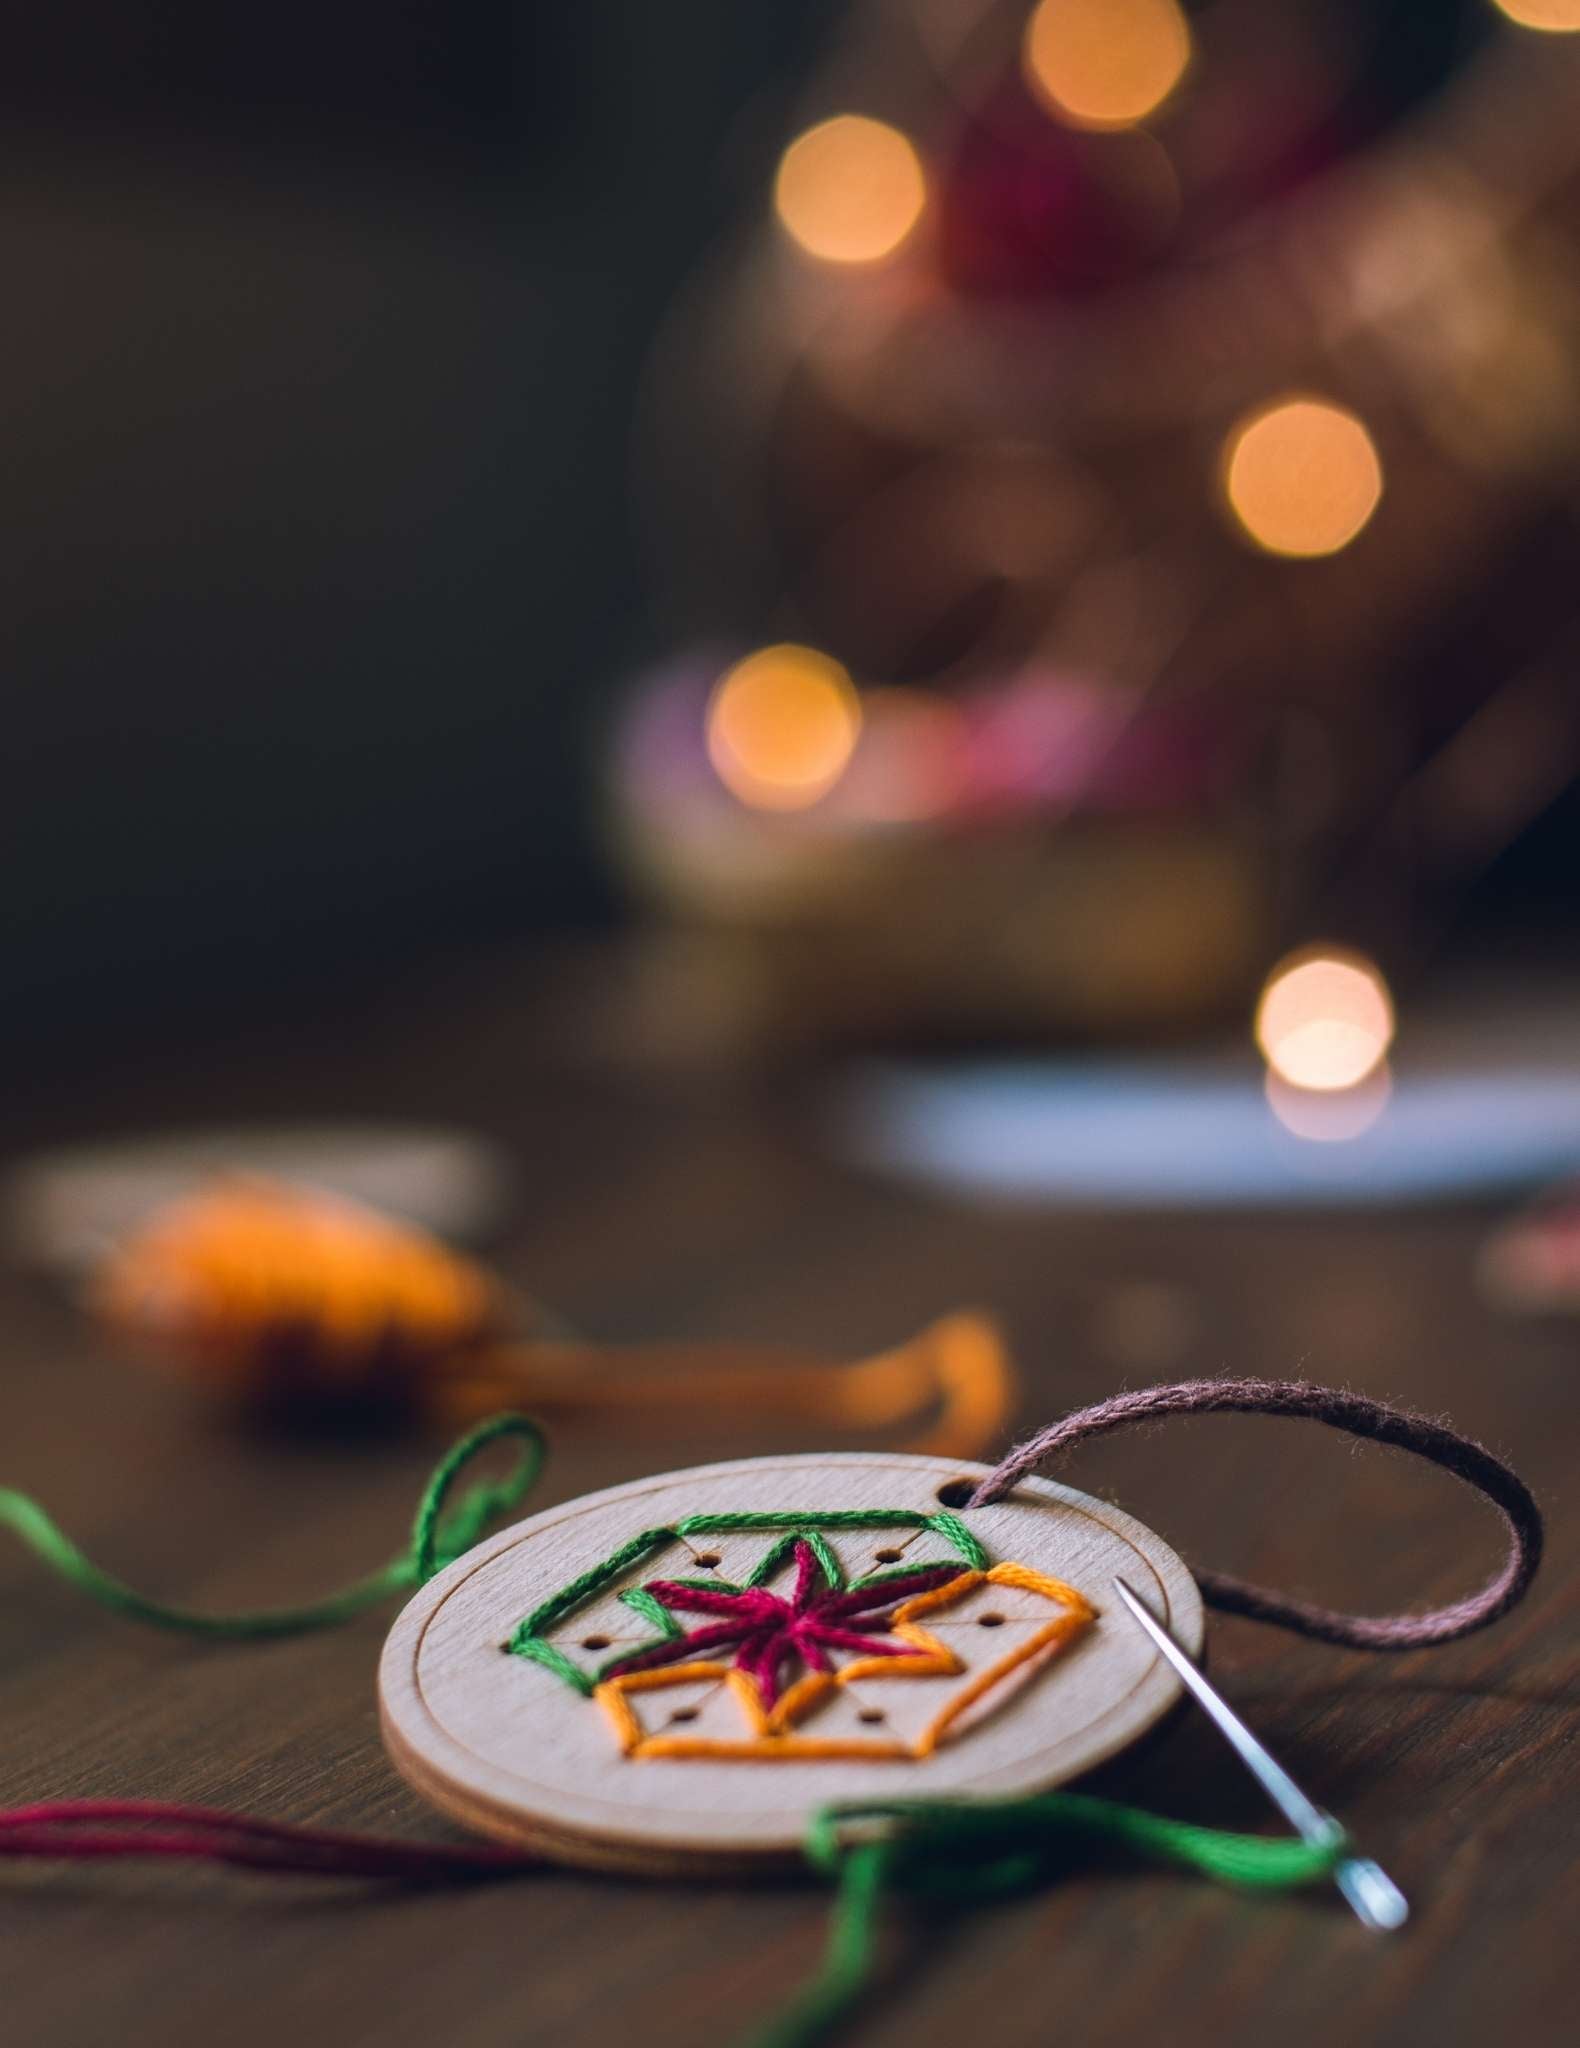 A circular wooden ornament is being hand stitched in a snowflake motif with brightly coloured threads. It lies on a table in front of a tree with fairy lights.